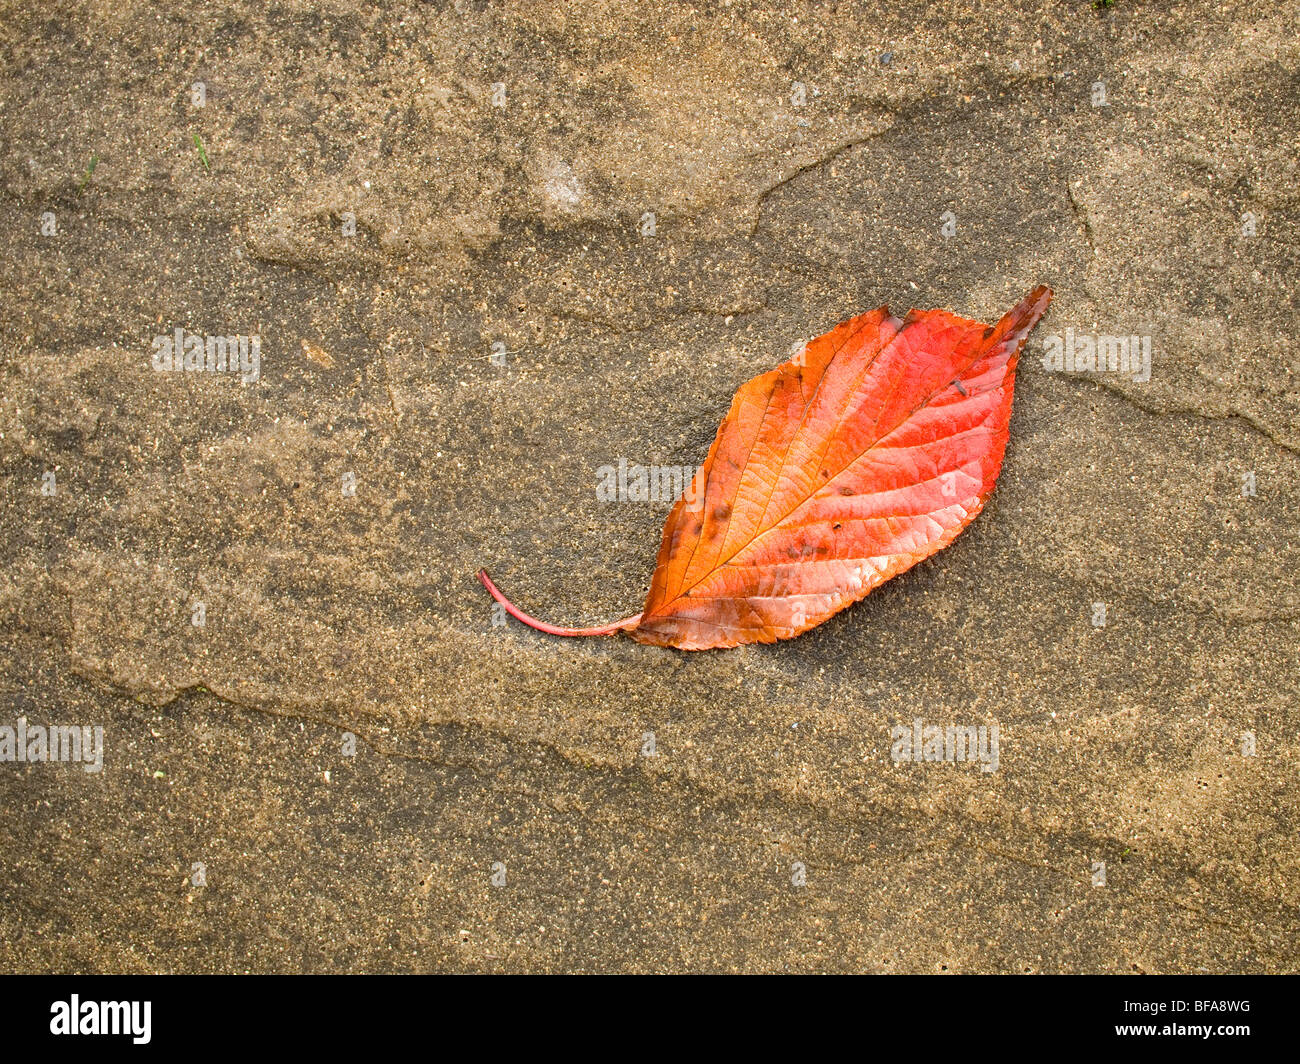 Concept of autumn or fall with a red leaf from a cherry tree on a York stone pavement Stock Photo